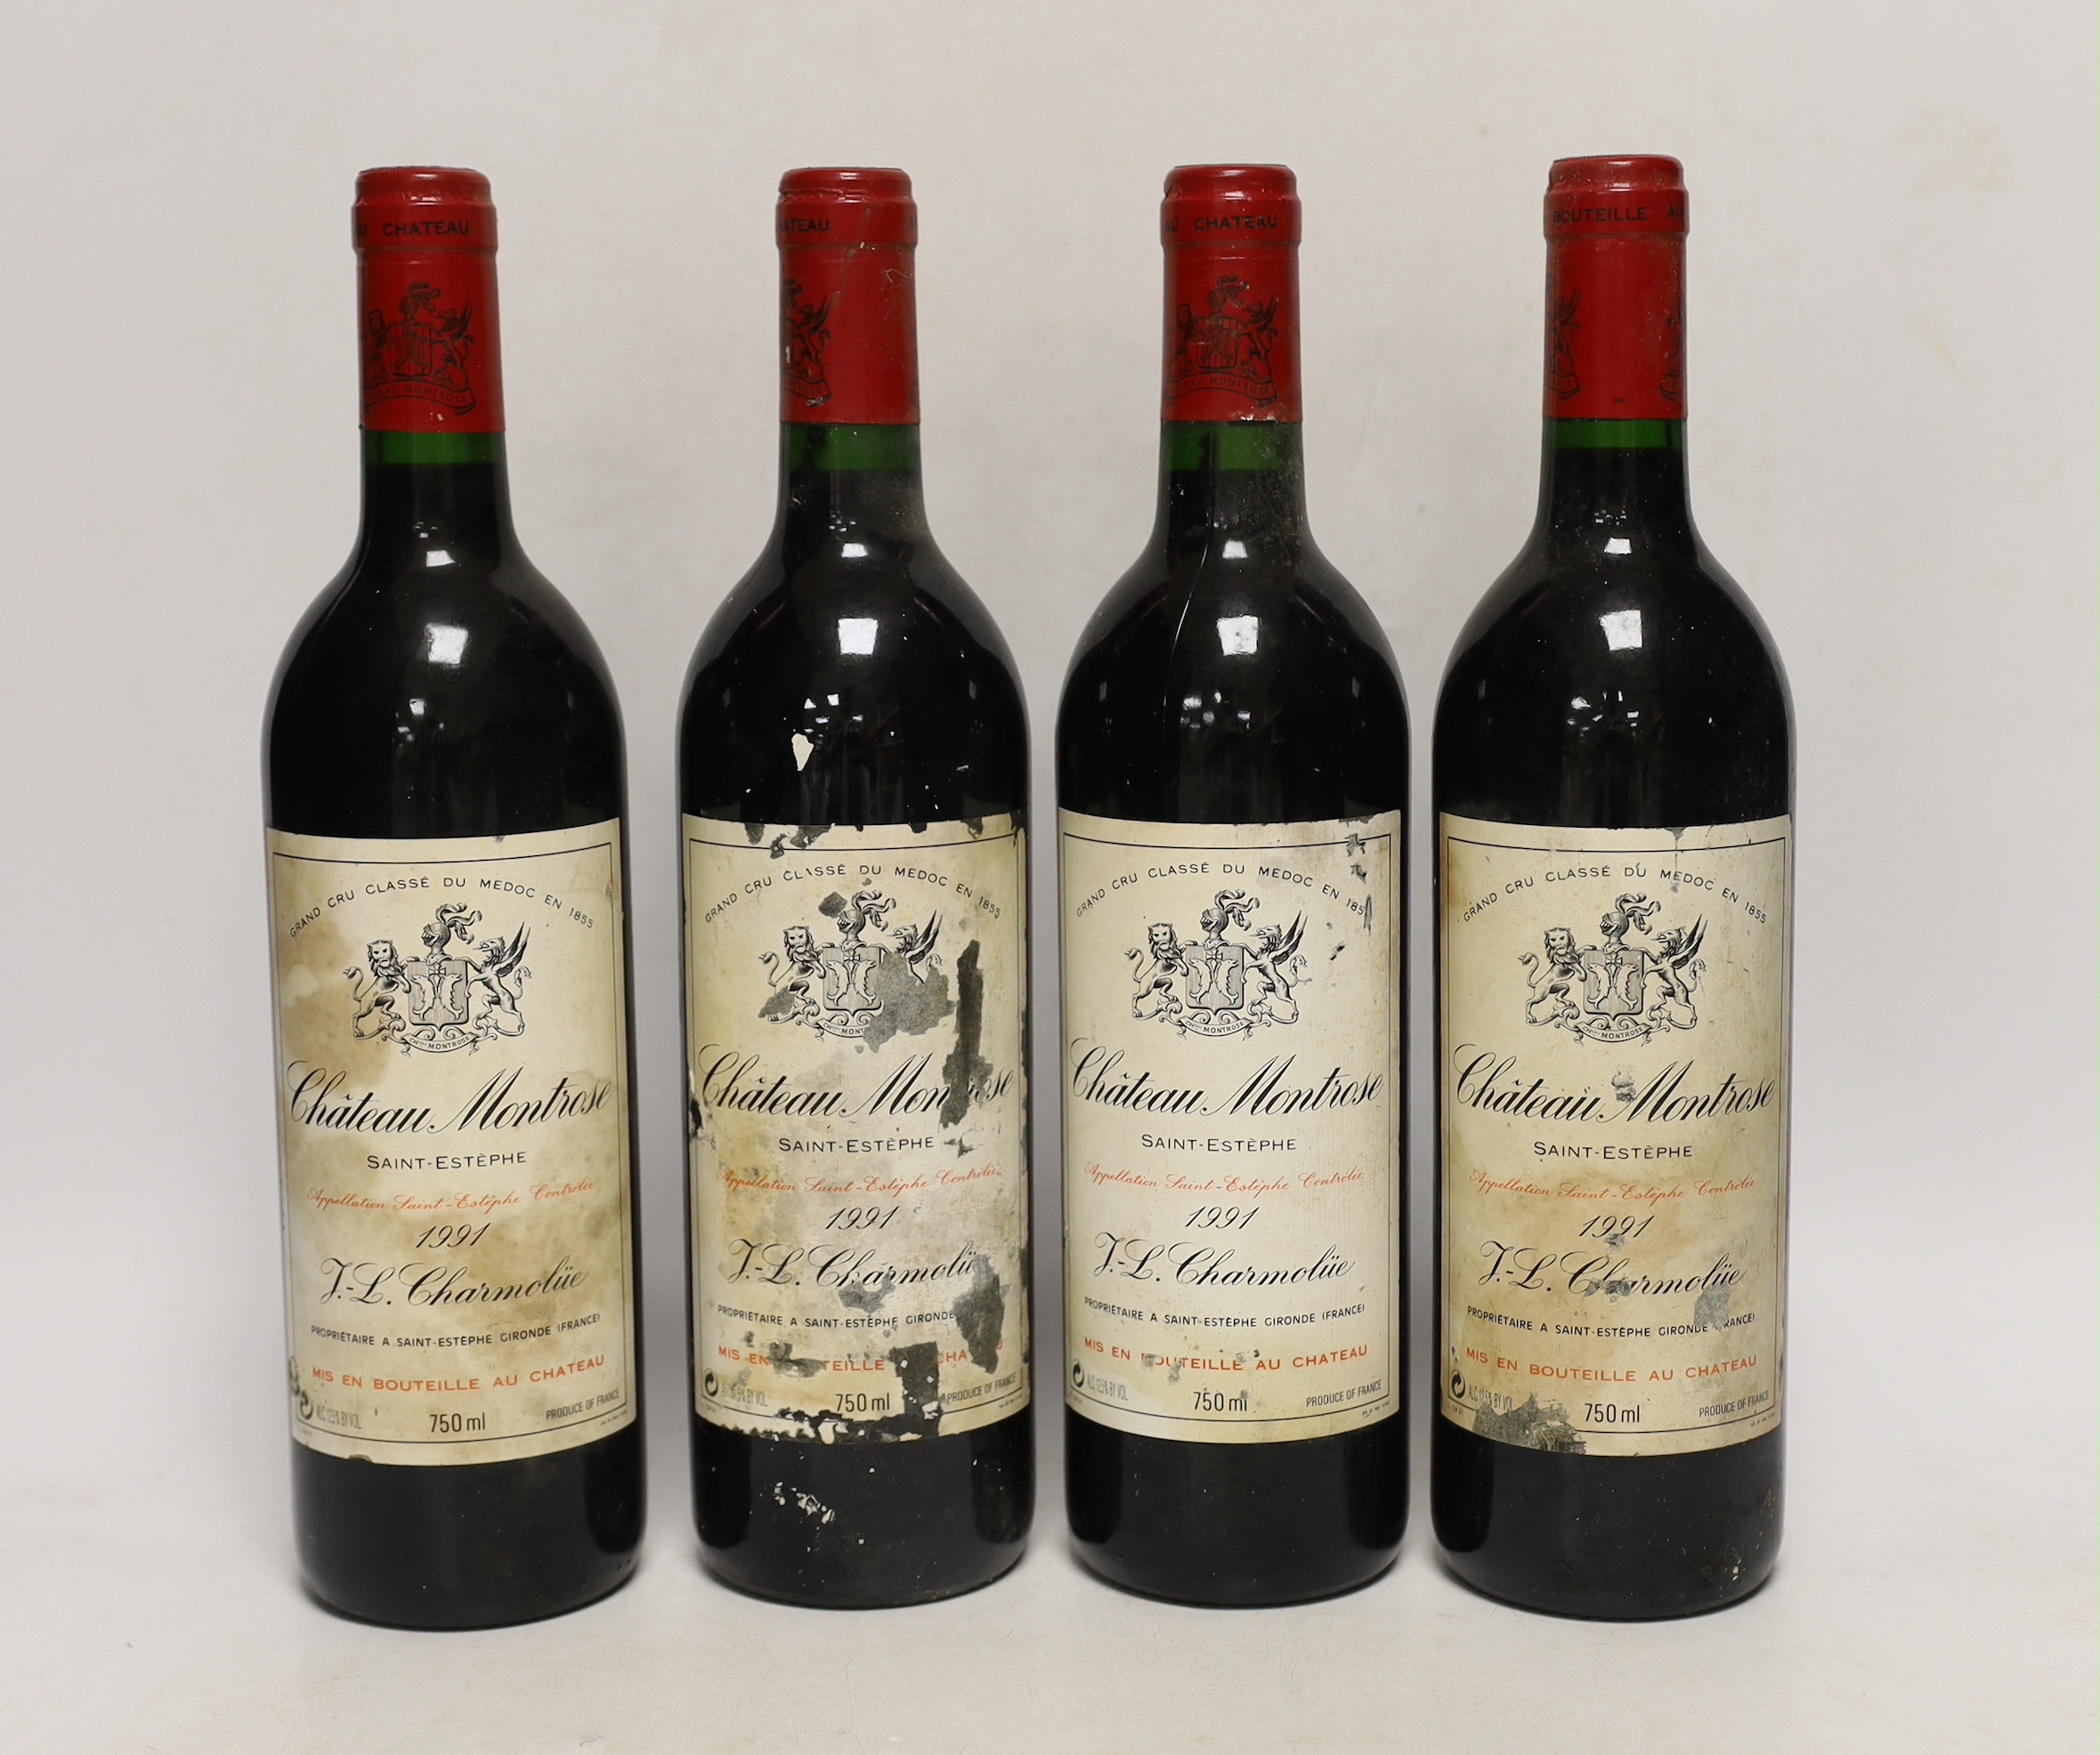 Four bottles of Chateau Montrose 1991 wine